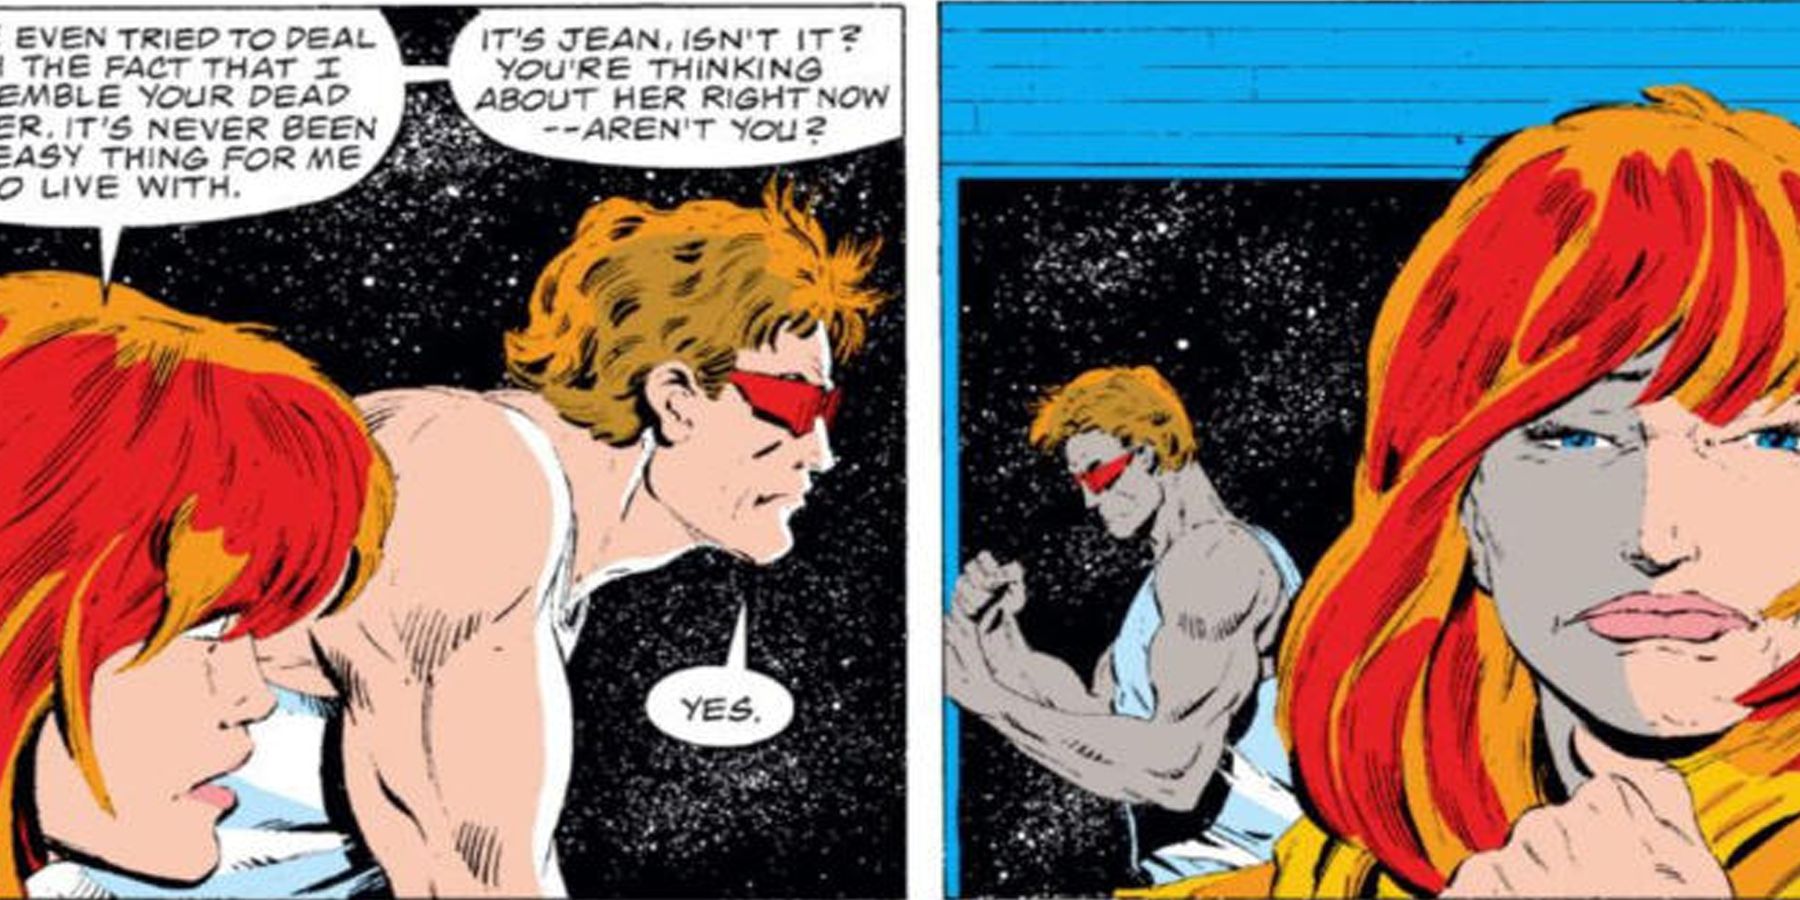 Scott Summers a.k.a. Cyclops and Madelyn Pryor from Marvel Comics